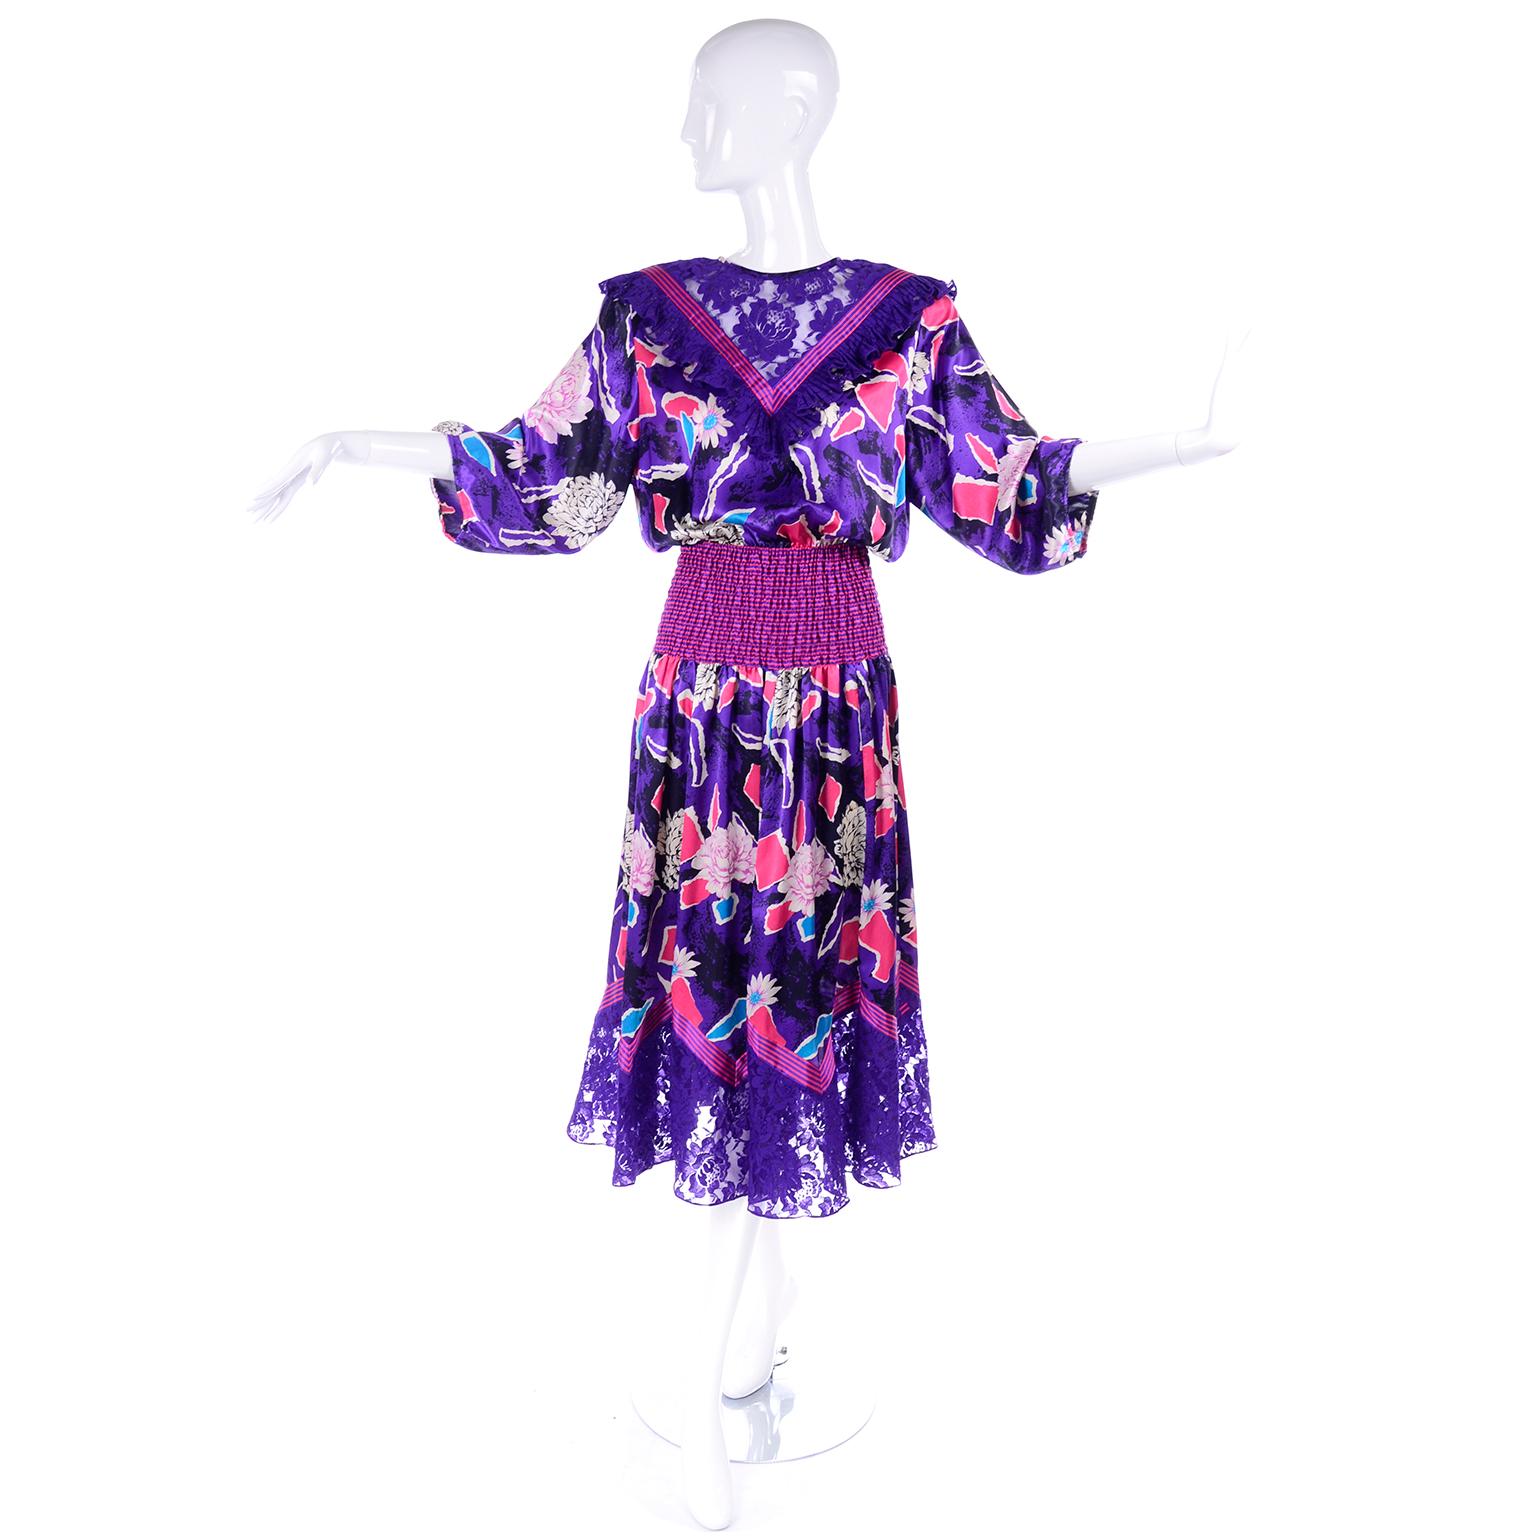 This is a beautiful 1980's Diane Freis floral dress! It has a Victorian style neckline, with illusion floral lace and ruffles. It has a shirred waistband as well as purple lace along the hem. There are 3/4 length puff sleeves and the fabric has a